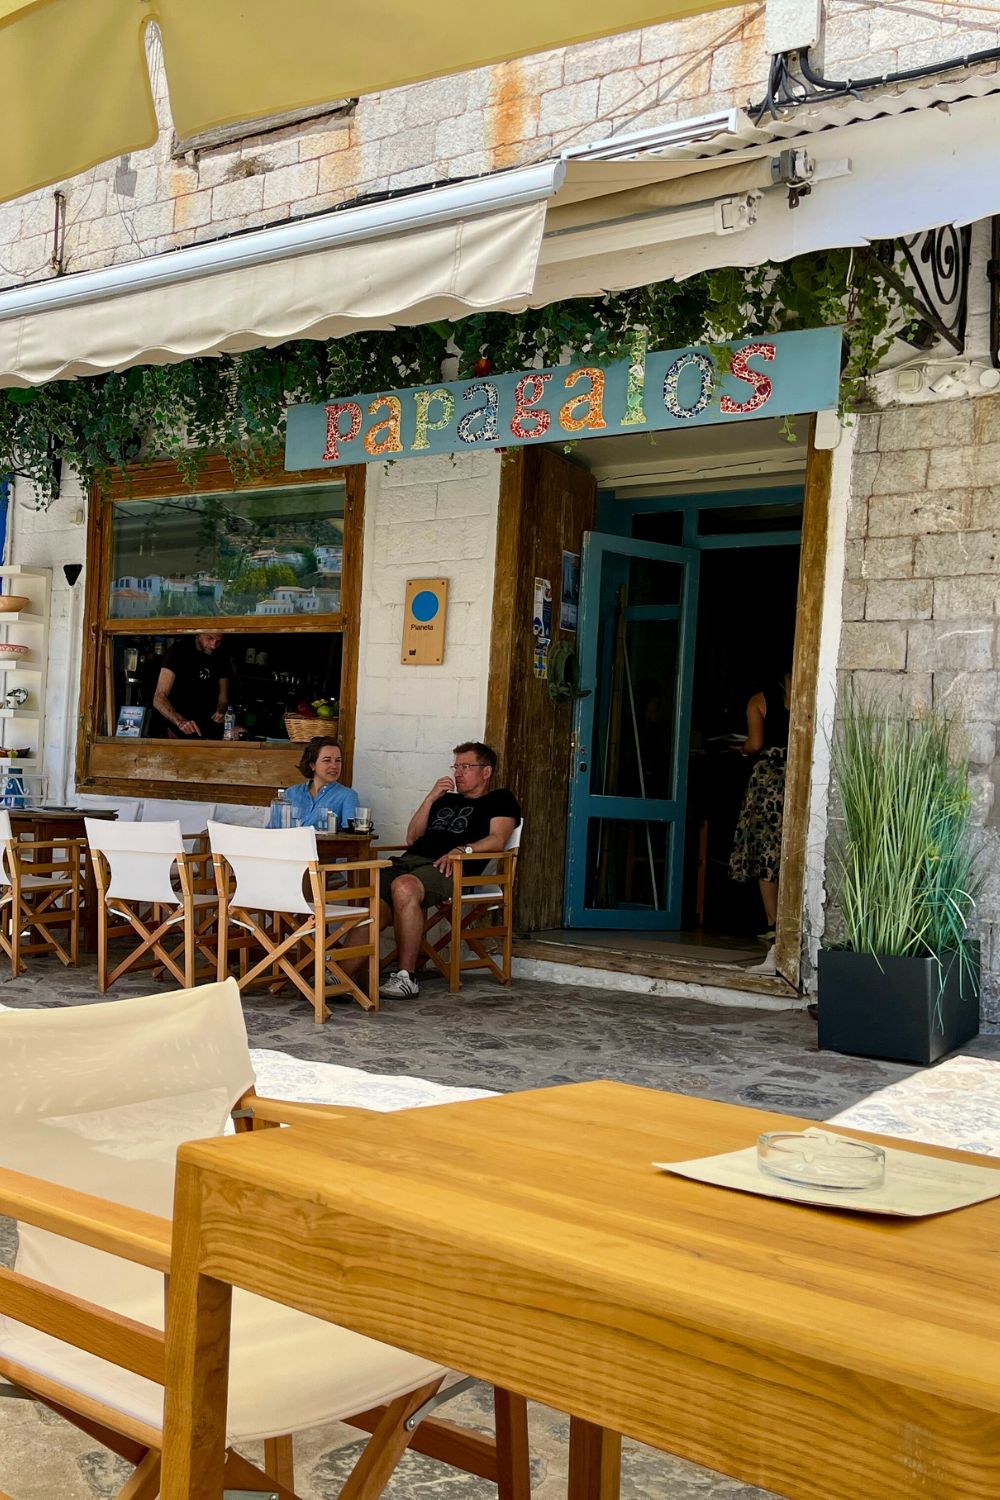 Casual outdoor dining at Papagalos restaurant in Hydra, with patrons enjoying the ambiance under the shade of a vine-covered awning, epitomizing the island's relaxed dining culture.